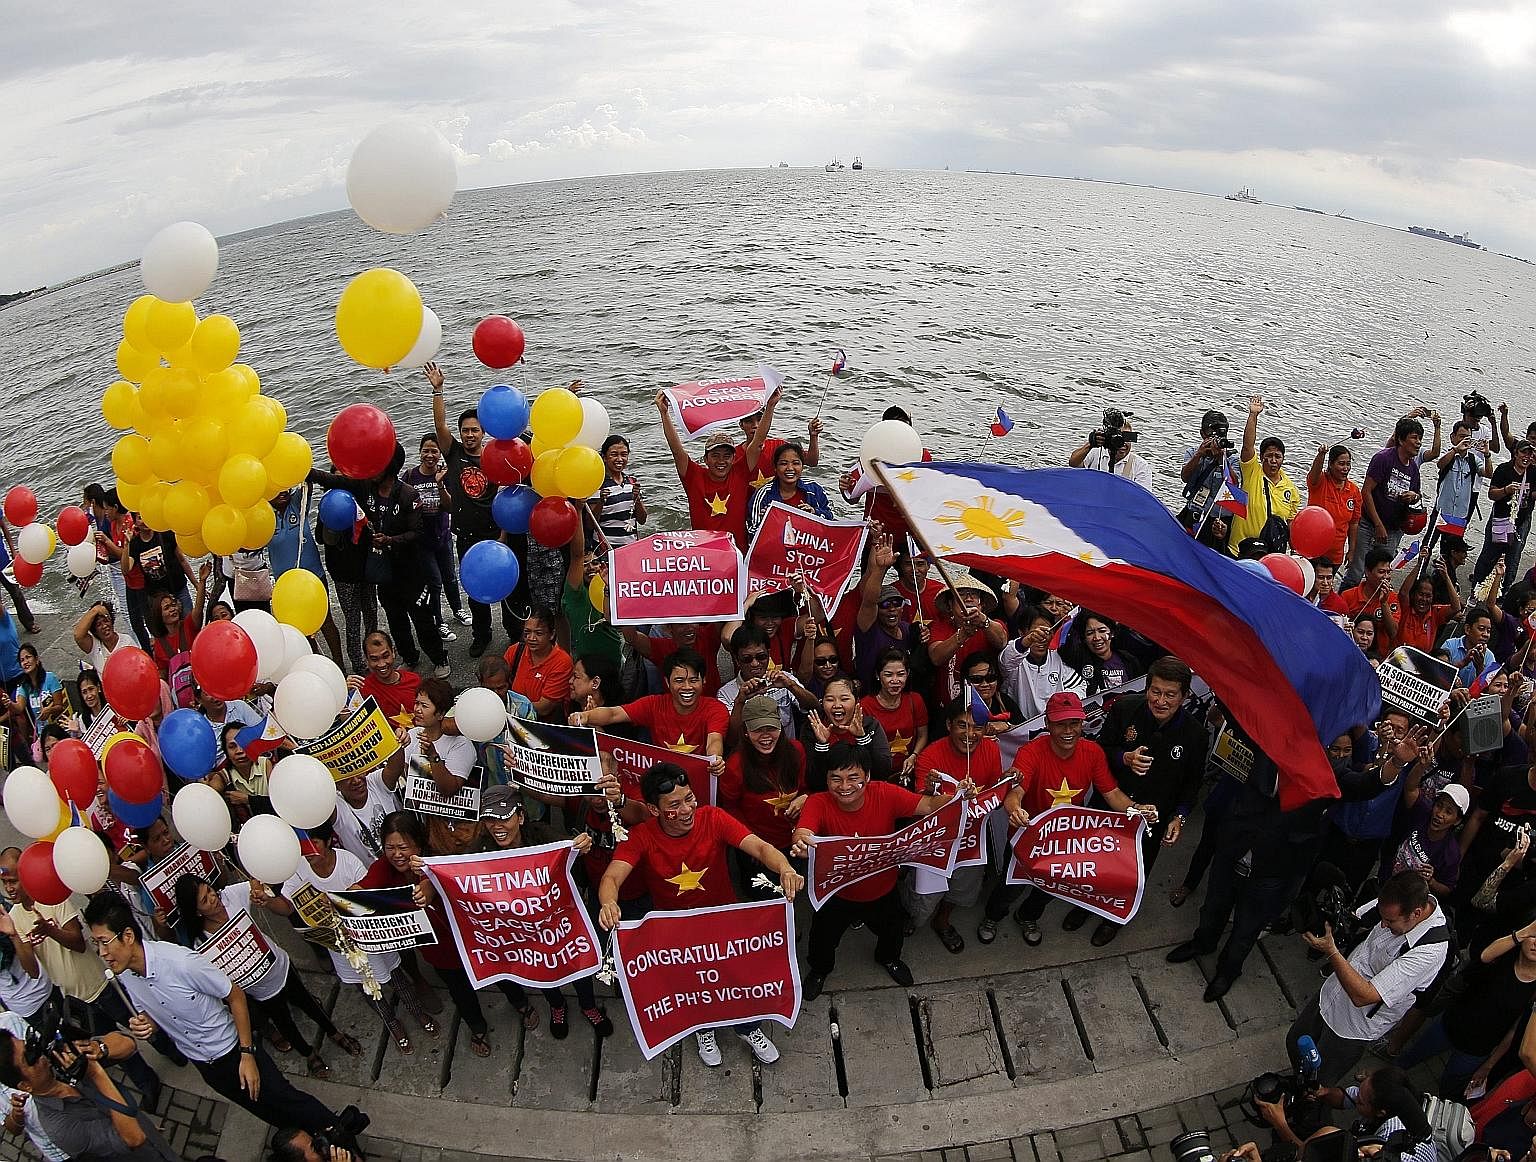 Civil society groups rallied in Manila on Tuesday, ahead of the UN-backed Arbitral Tribunal's ruling. The tribunal ruled unanimously in favour of almost all of the 15 disputes submitted by Manila.